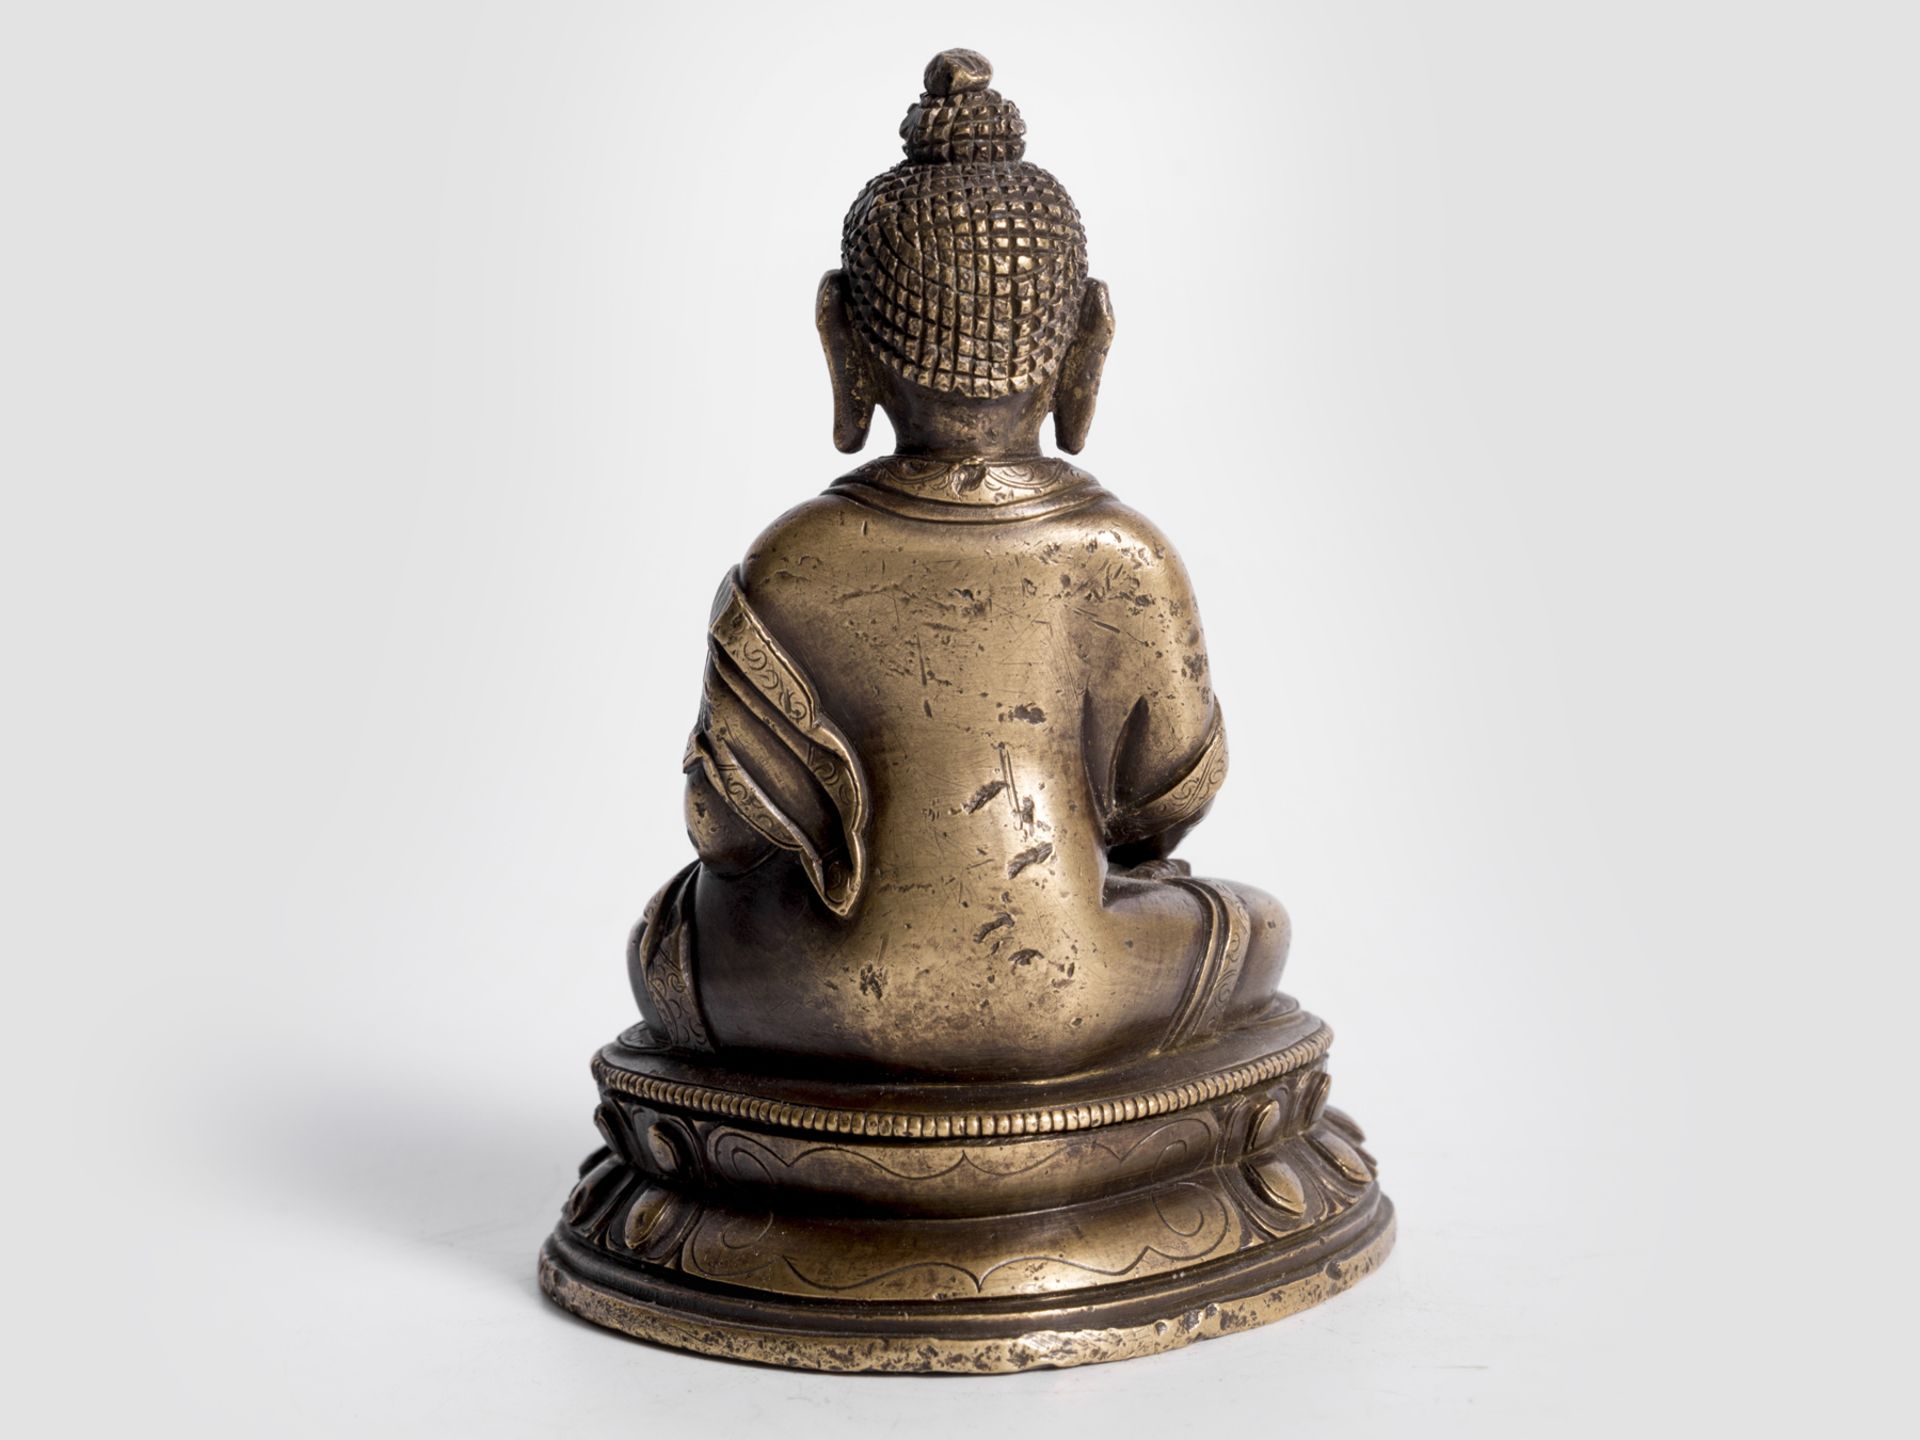 Sitting Buddha, Southeast Asia / Thailand?, 17th - 19th century or earlier - Image 4 of 5